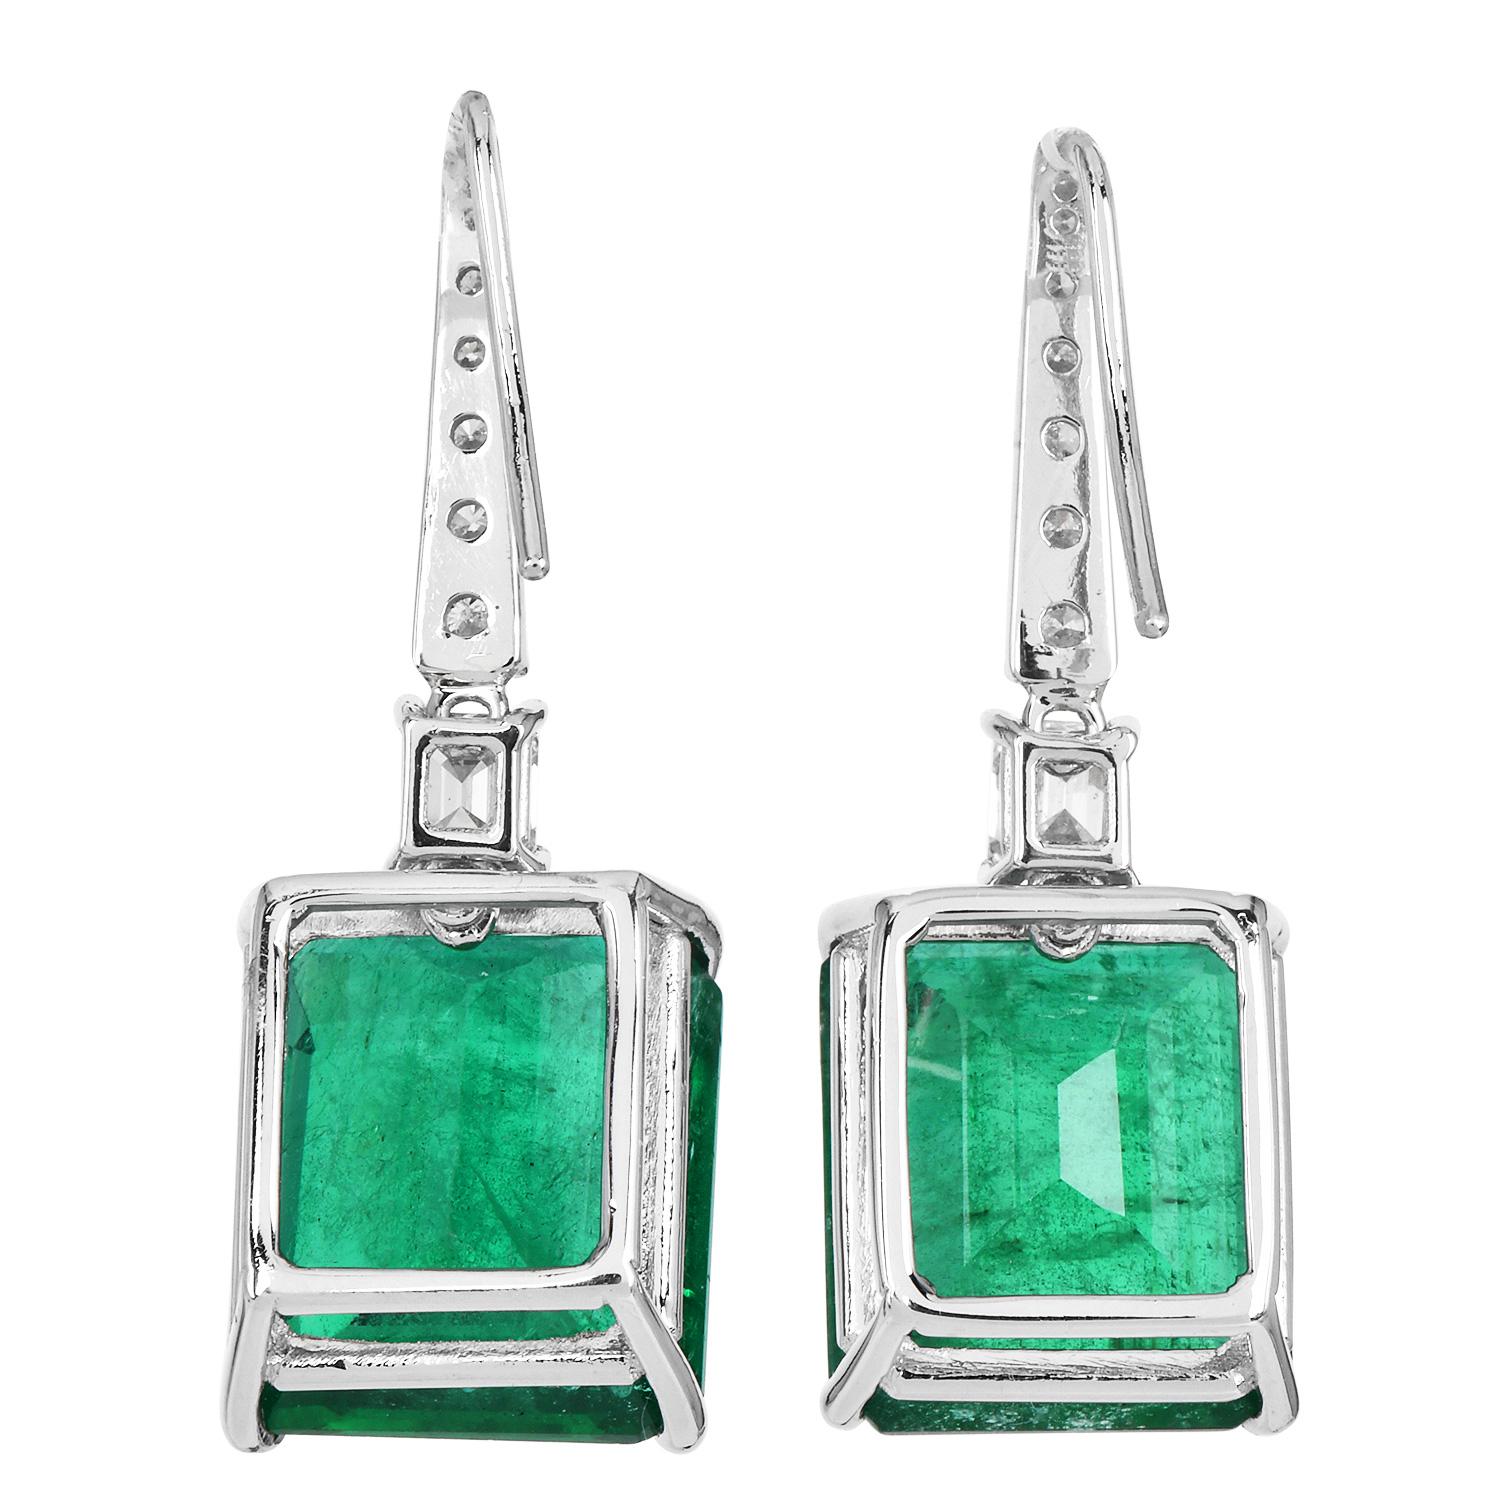 Magnificent 27.75 Carat Emerald Diamond 18k Gold Drop Earrings In Excellent Condition For Sale In Miami, FL